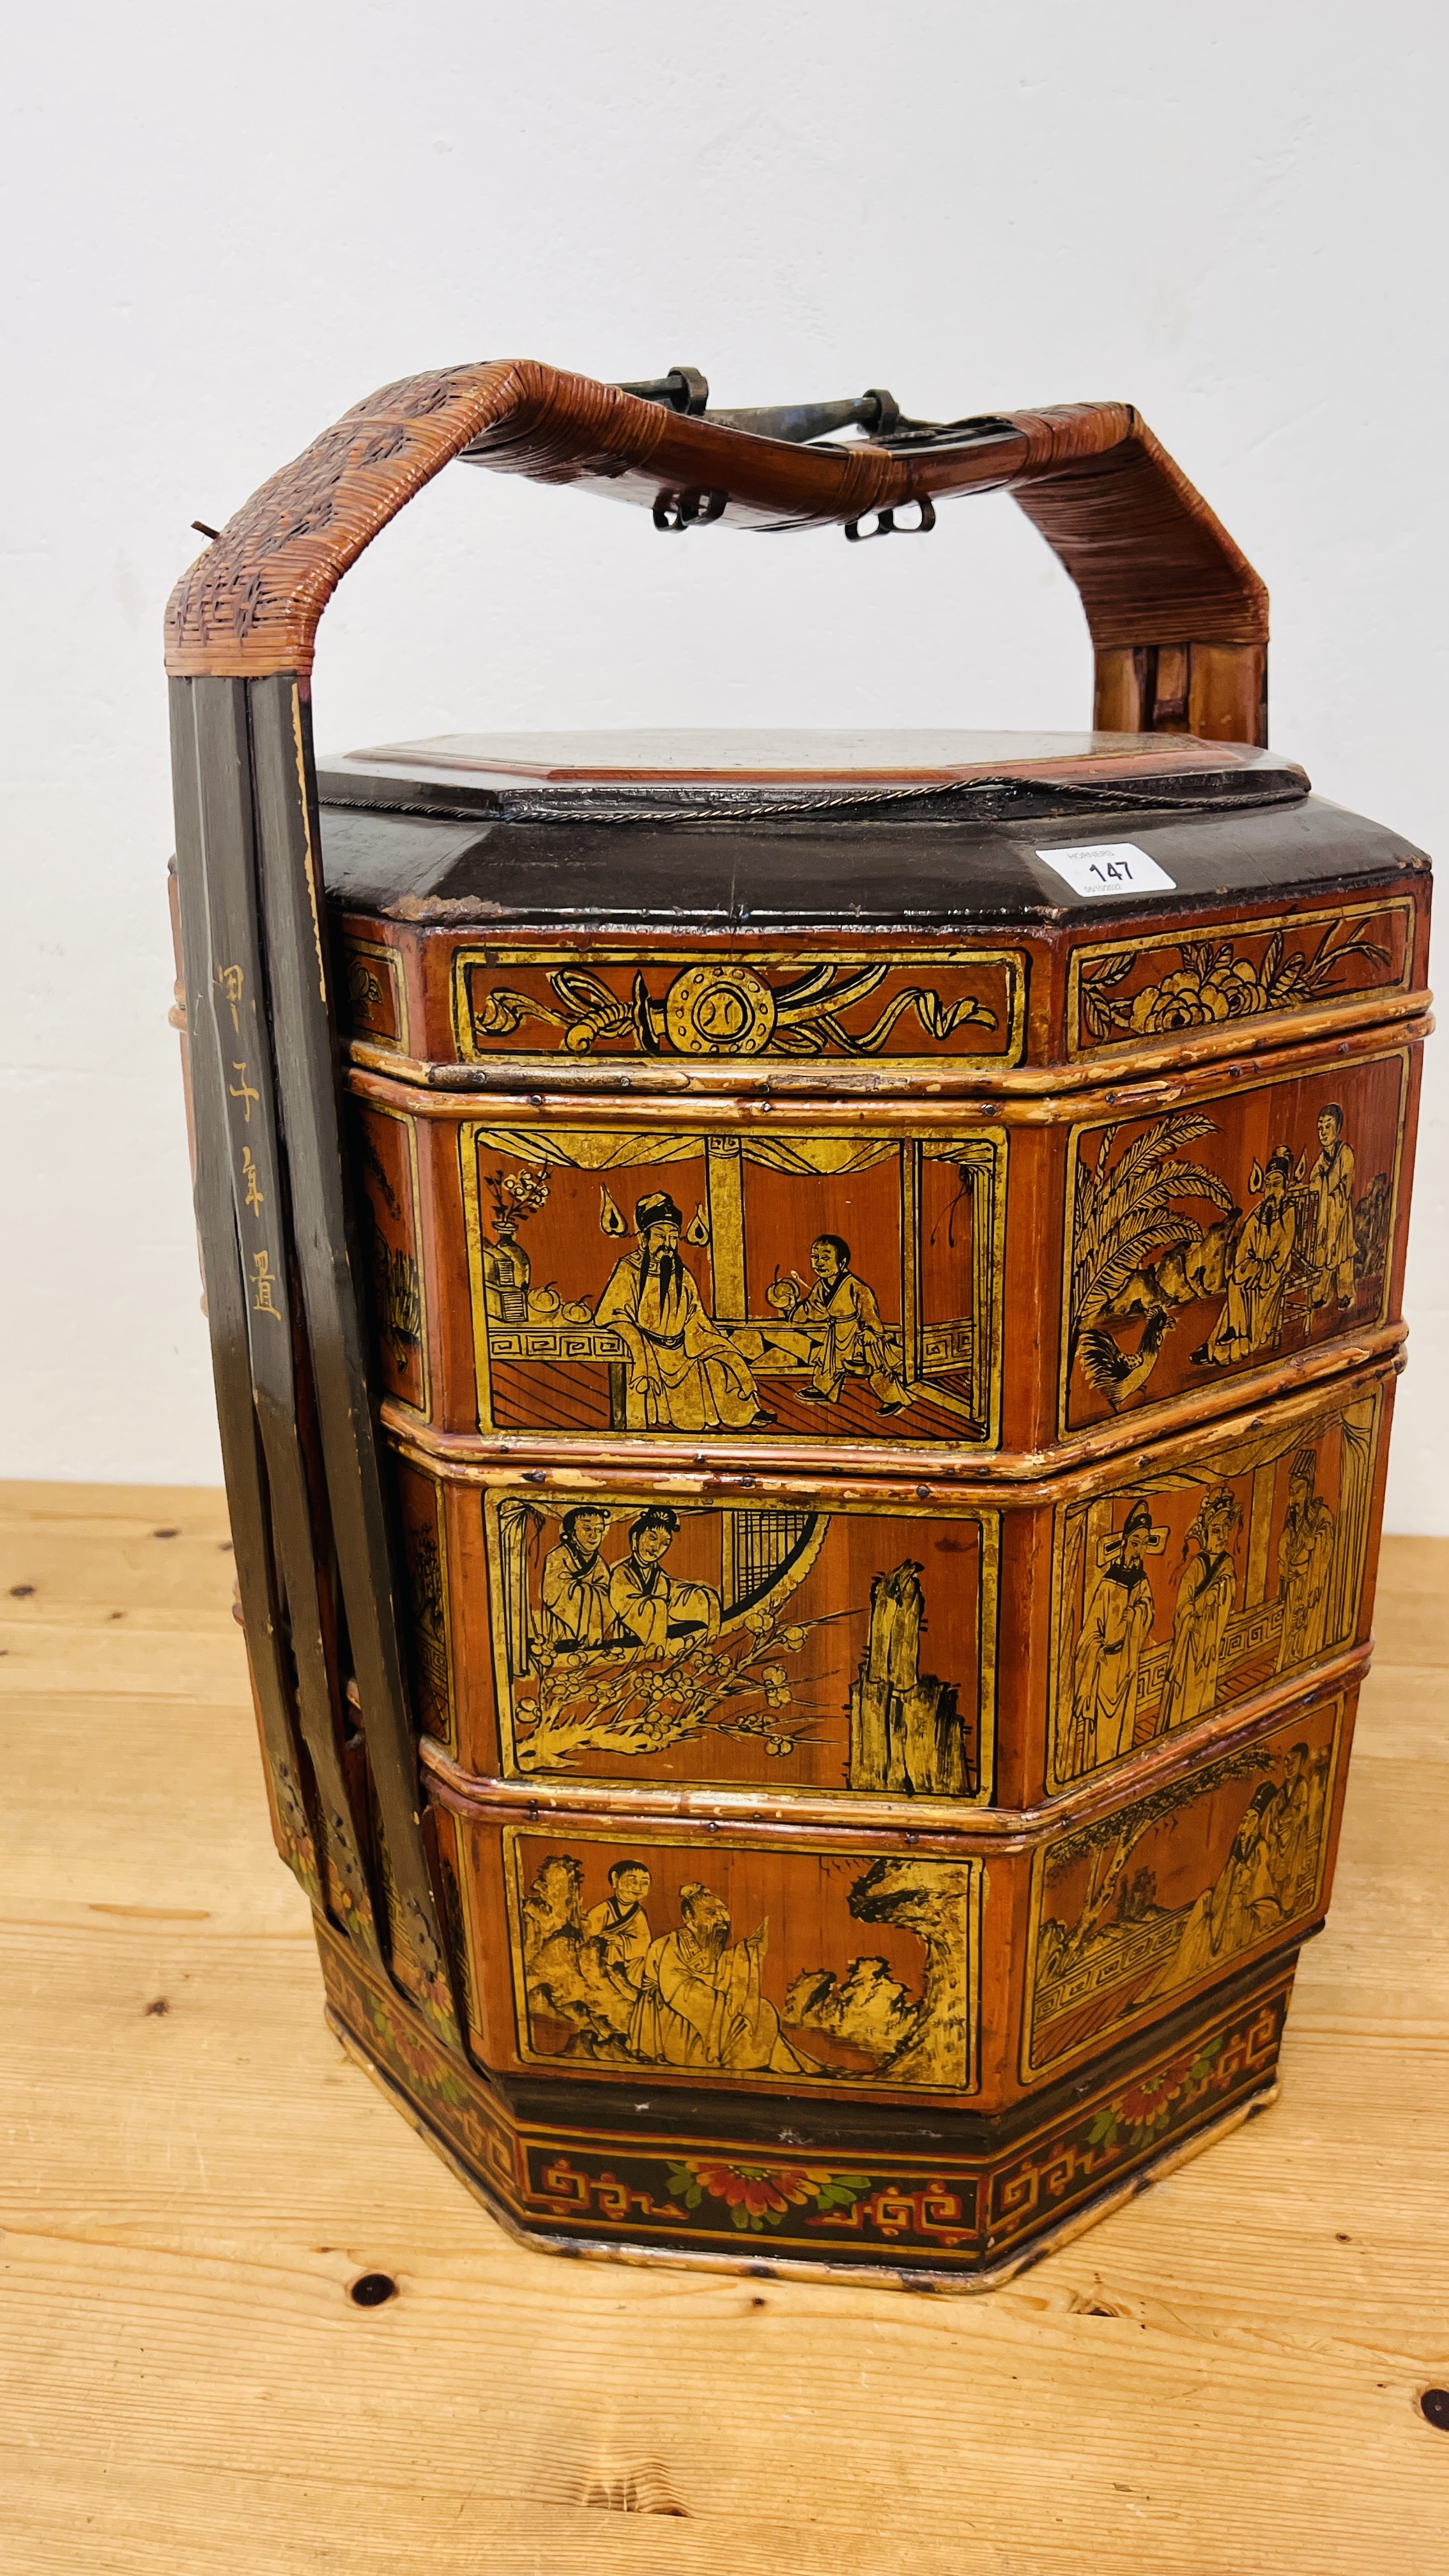 A HIGHLY DECORATIVE GILT DECORATED AND LACQUERED CHINESE WEDDING BASKET - HEIGHT 62CM.